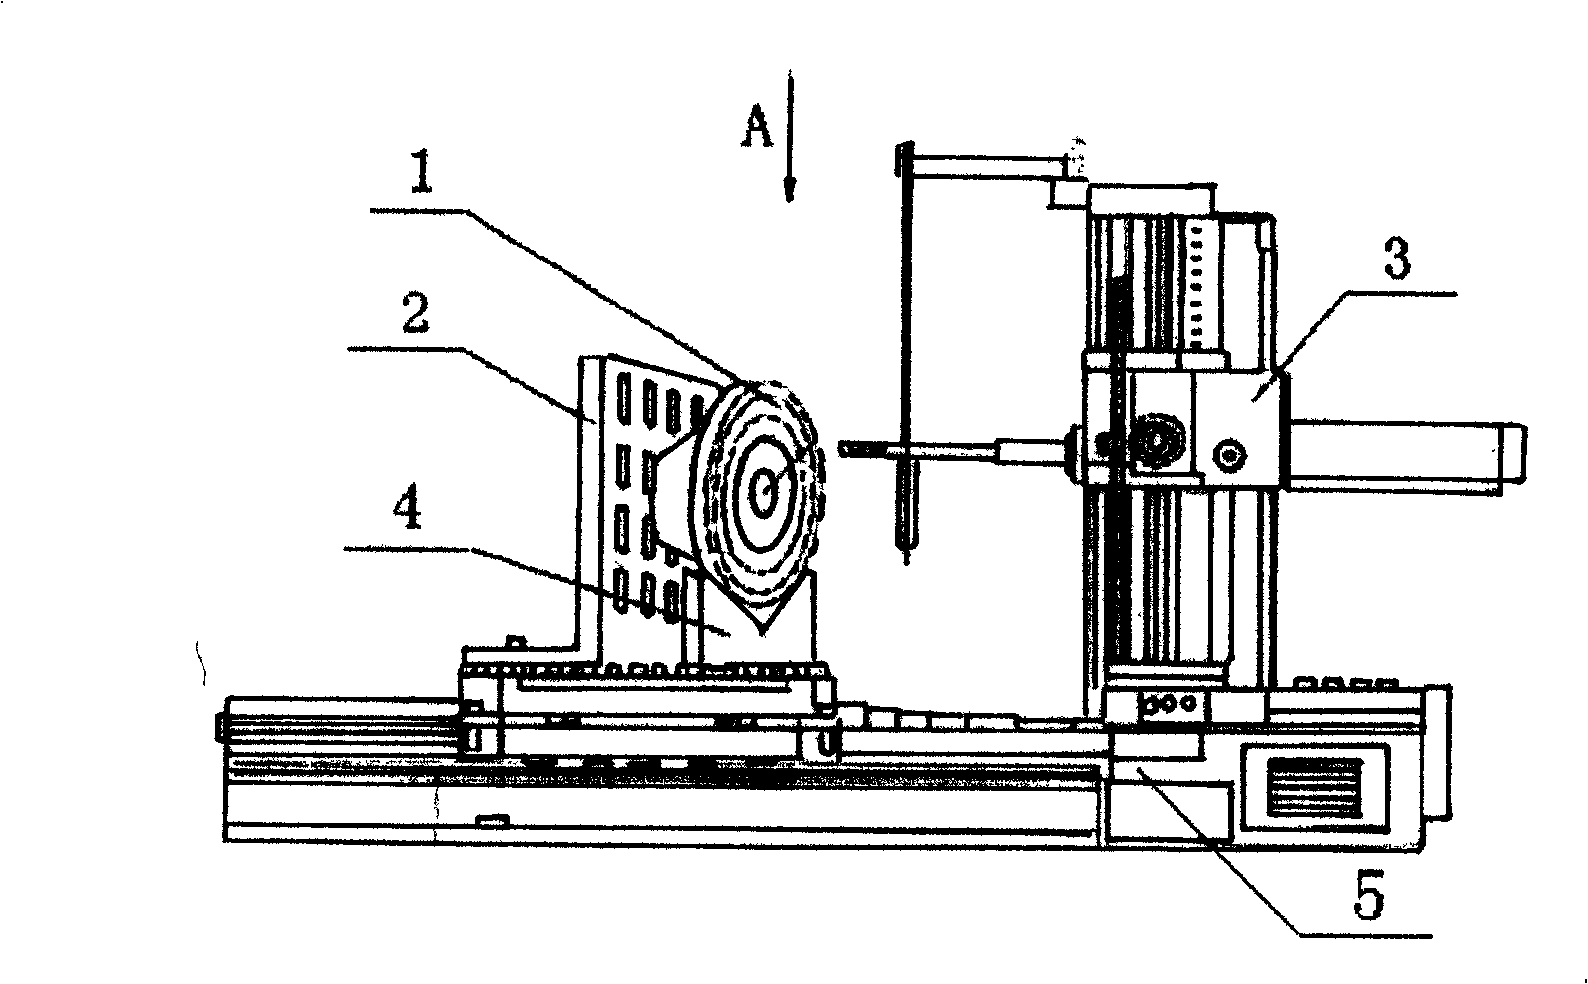 Mixed-flow turbine runner spilled water hole processing technique